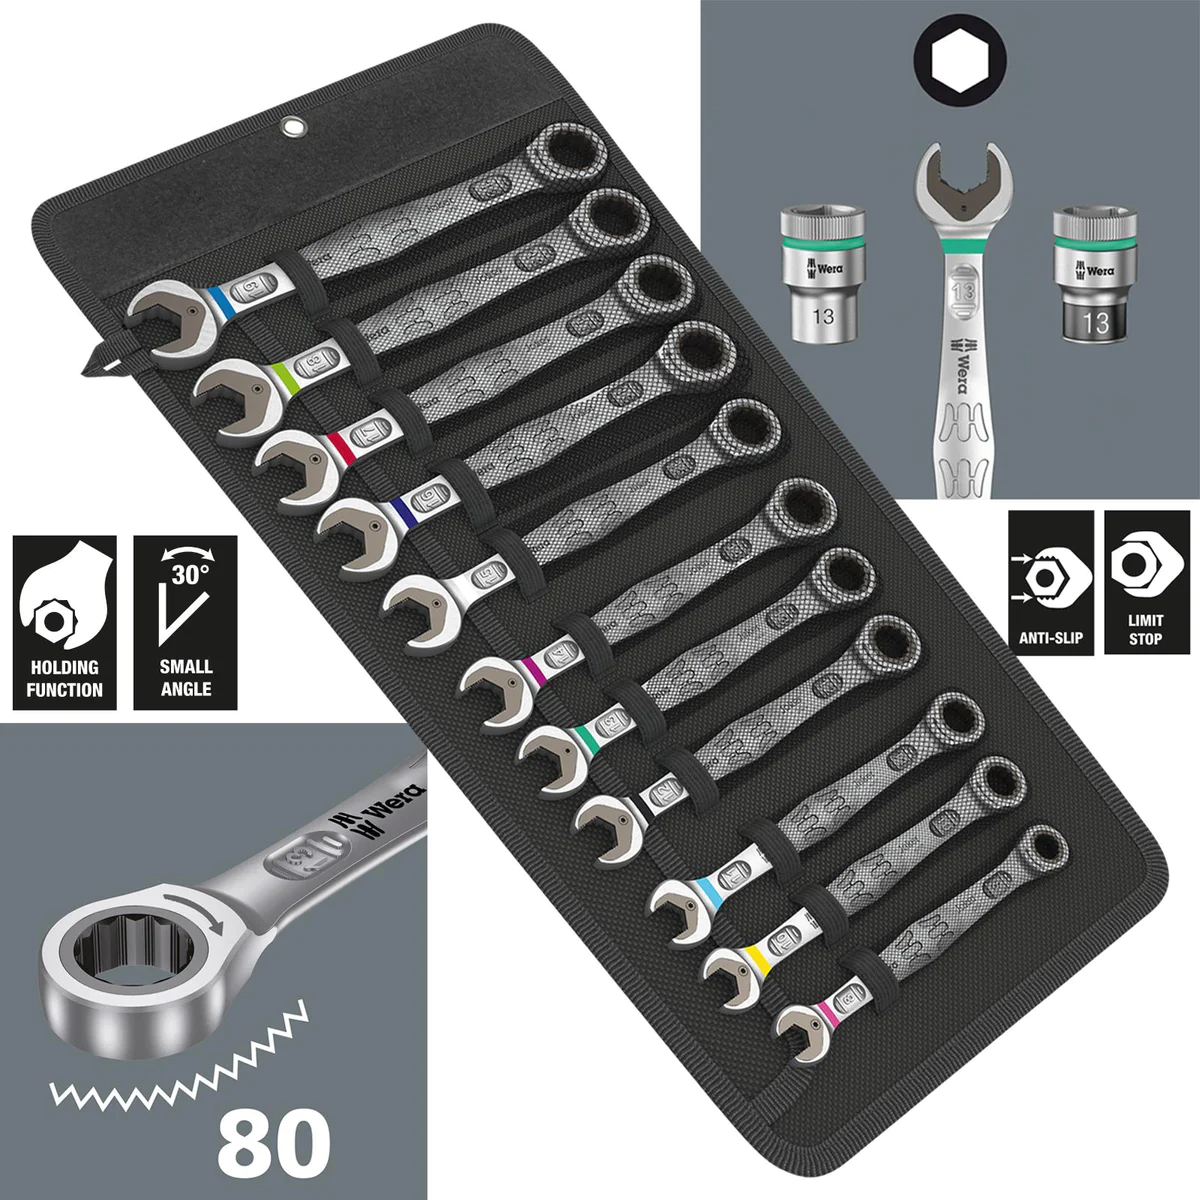 Wera Joker Combination Ratchet Wrench 11pc Set #11 - Power Tool  Competitions - Win Vans & Power Tools